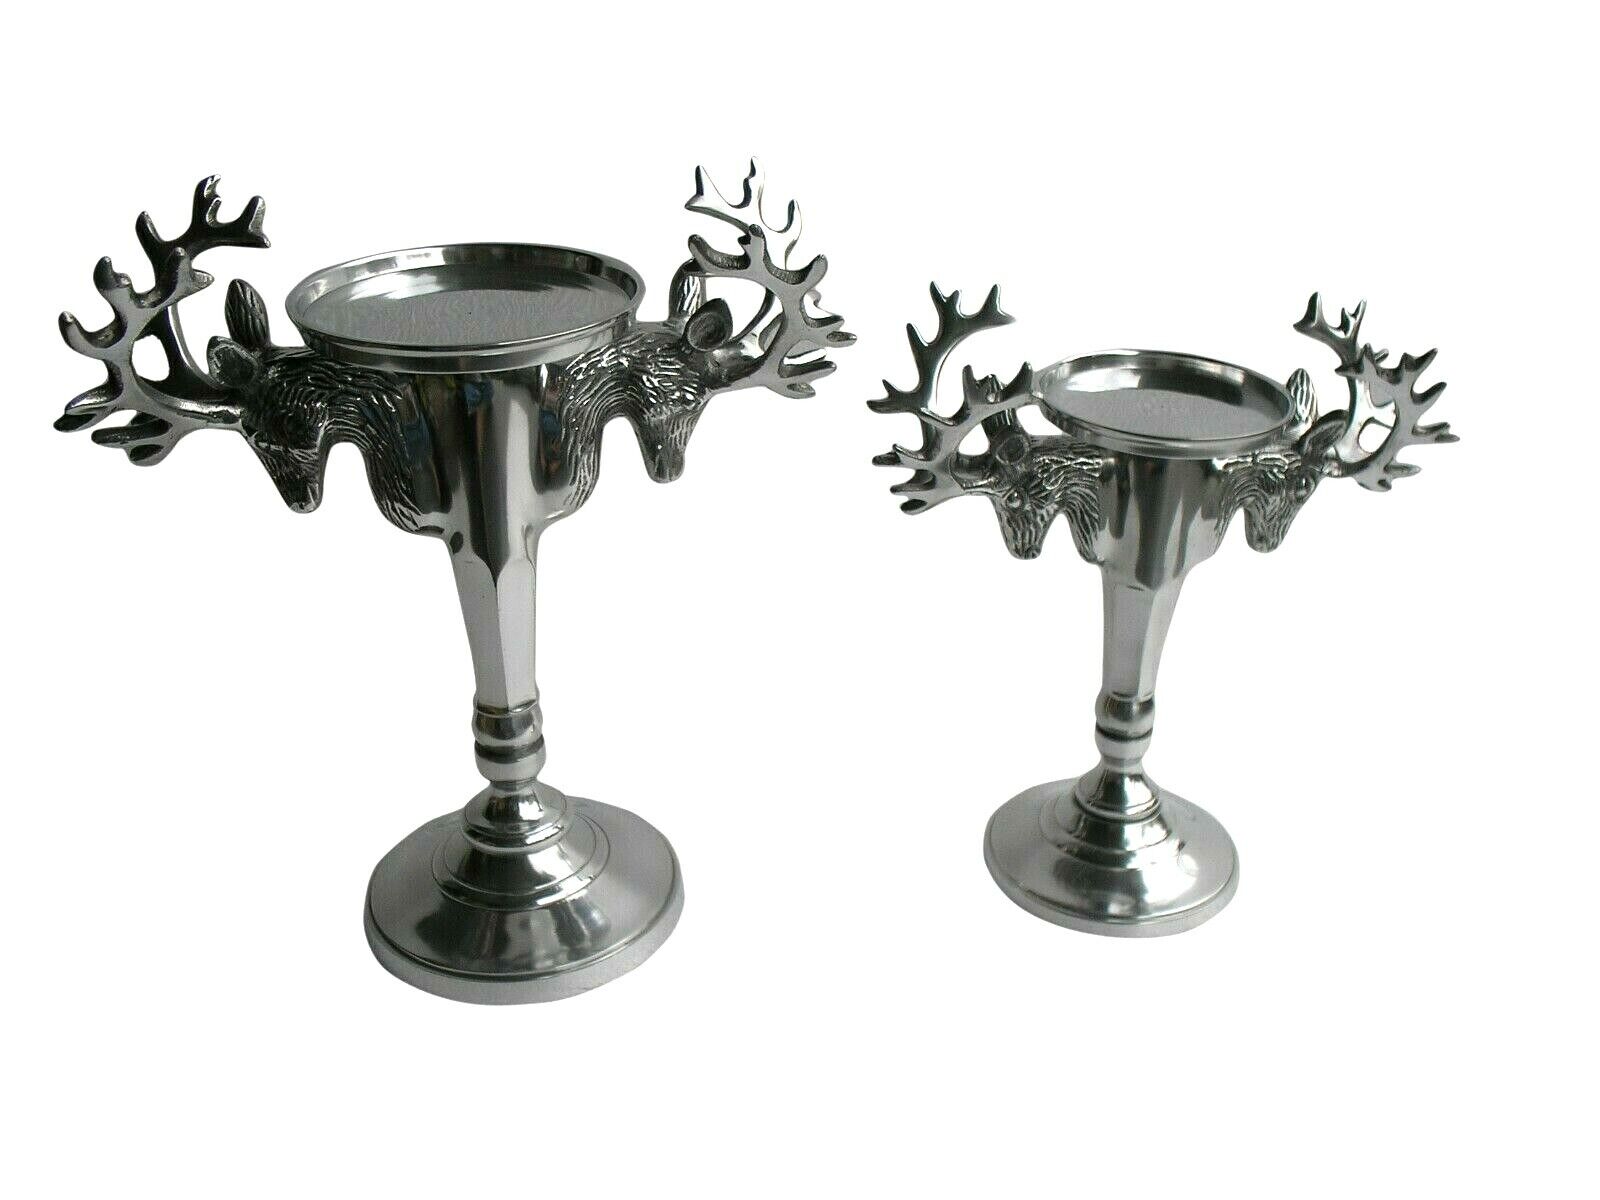 Aluminium Stag Head Pillar Candle Holder 10.5 inch & 8 inches Set of 2 Pcs Deer